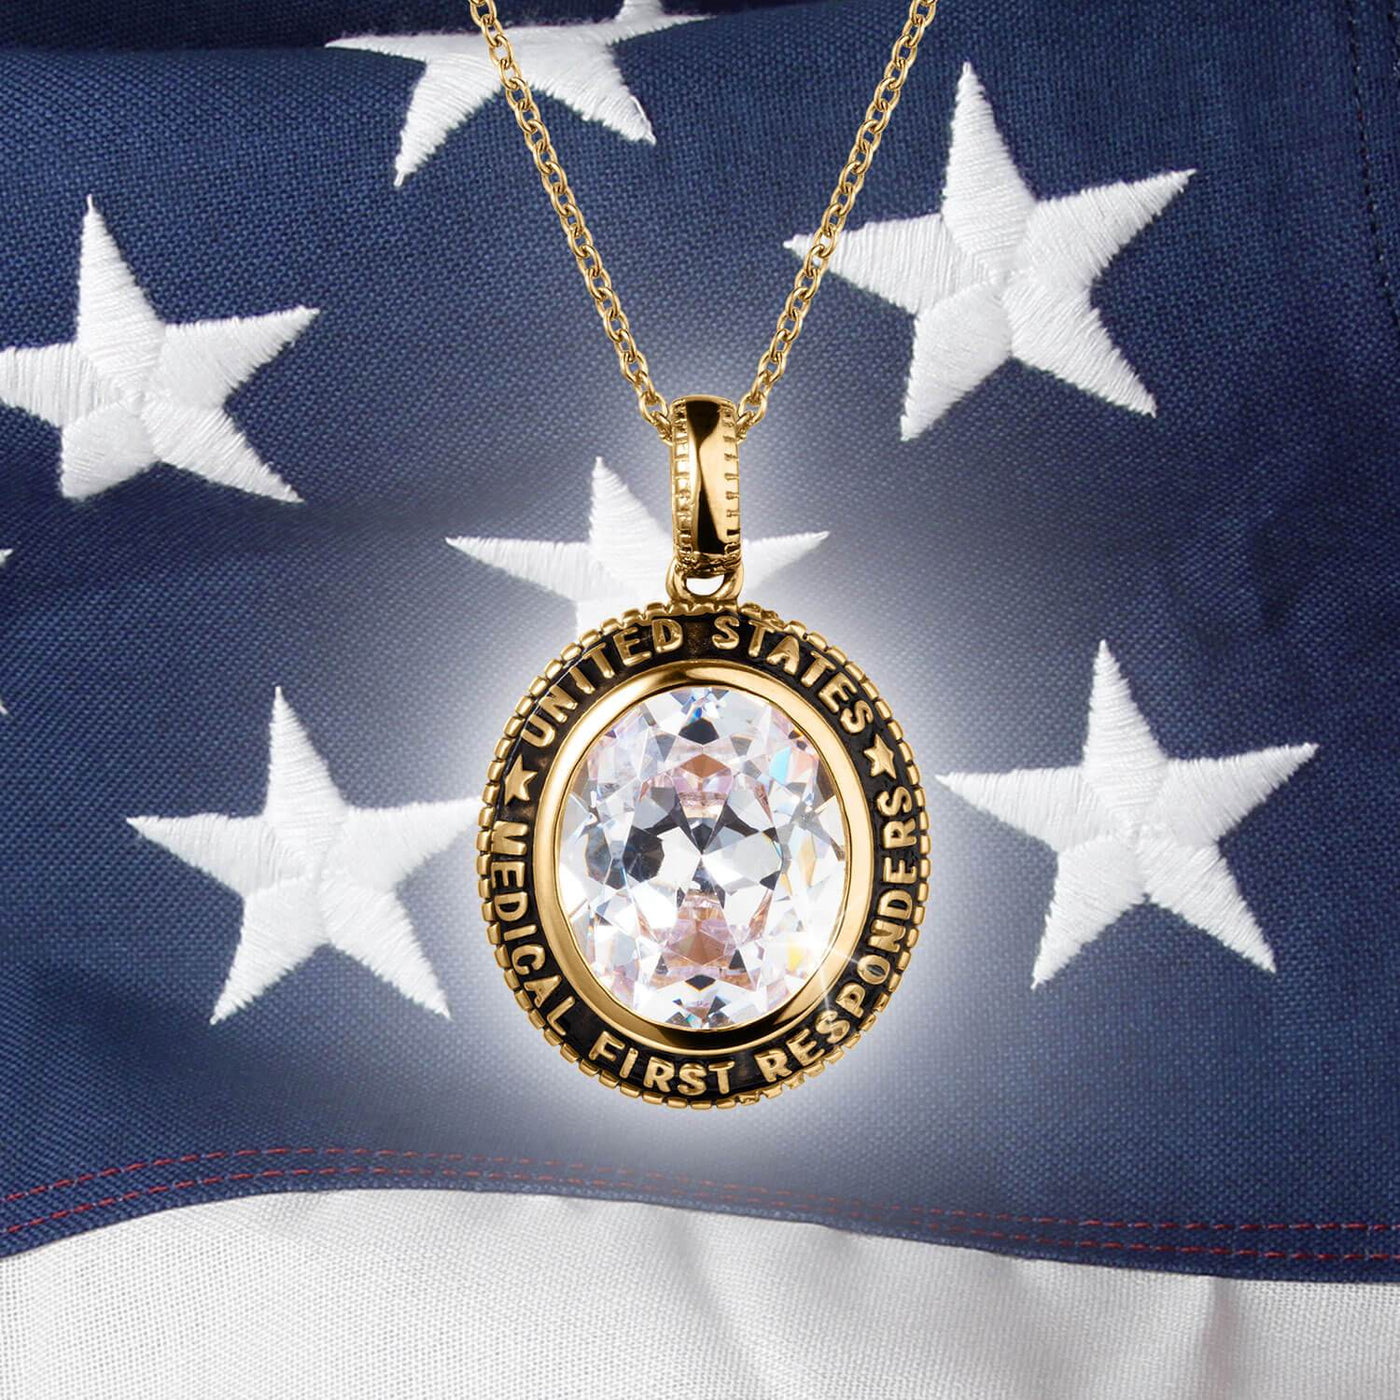 Medical First Responders Pendant | Timepieces International